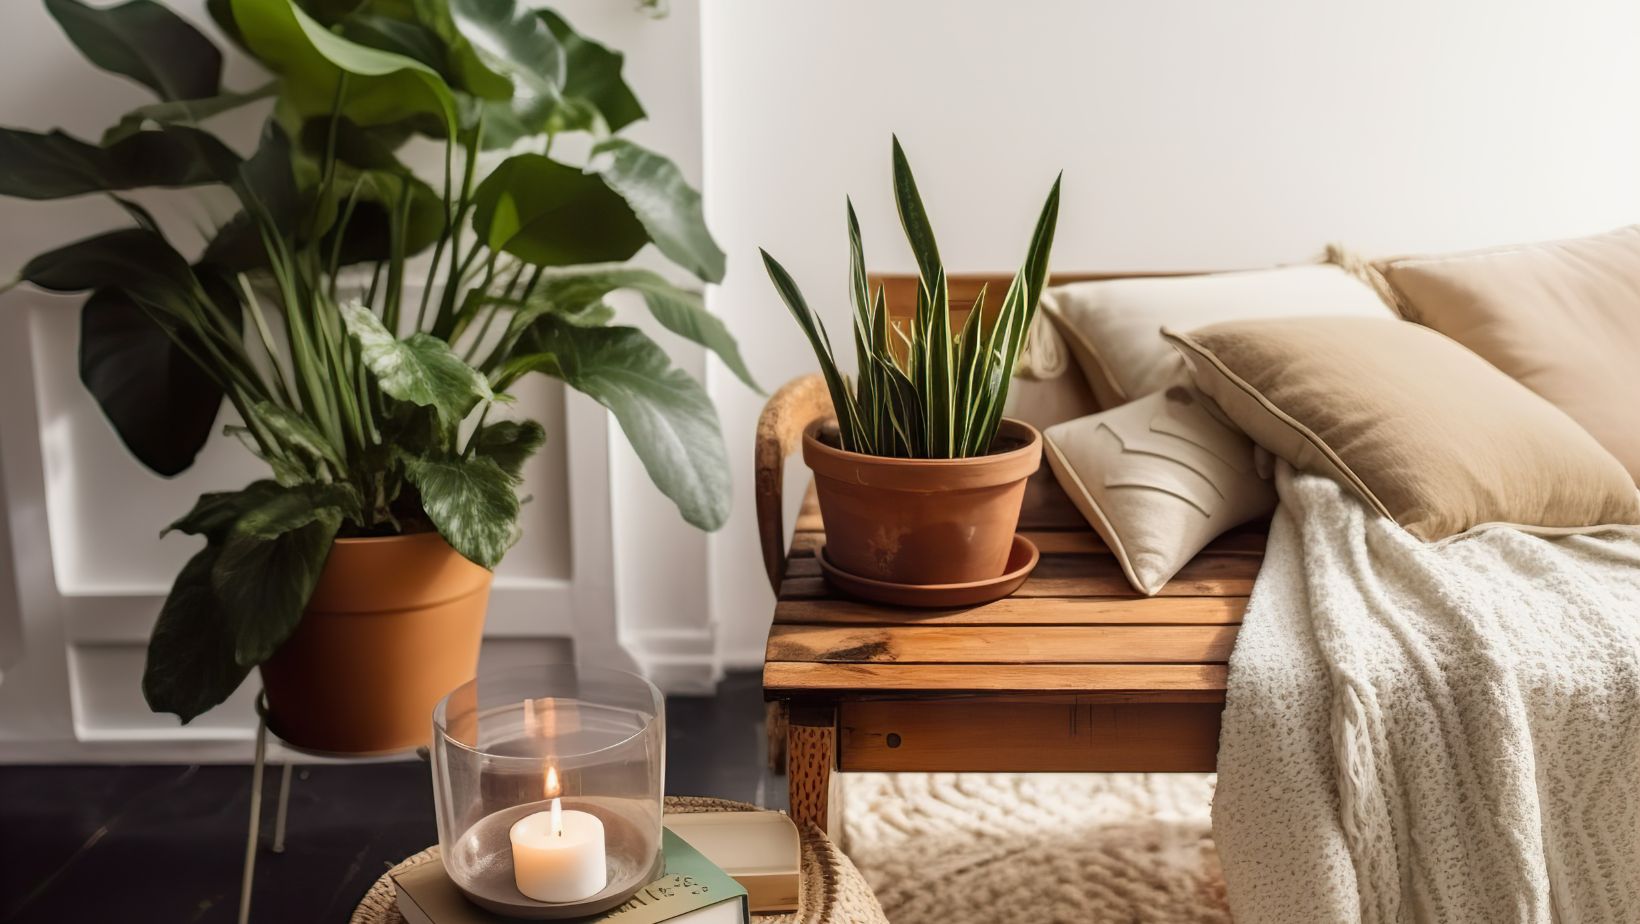 living room interior design with plants